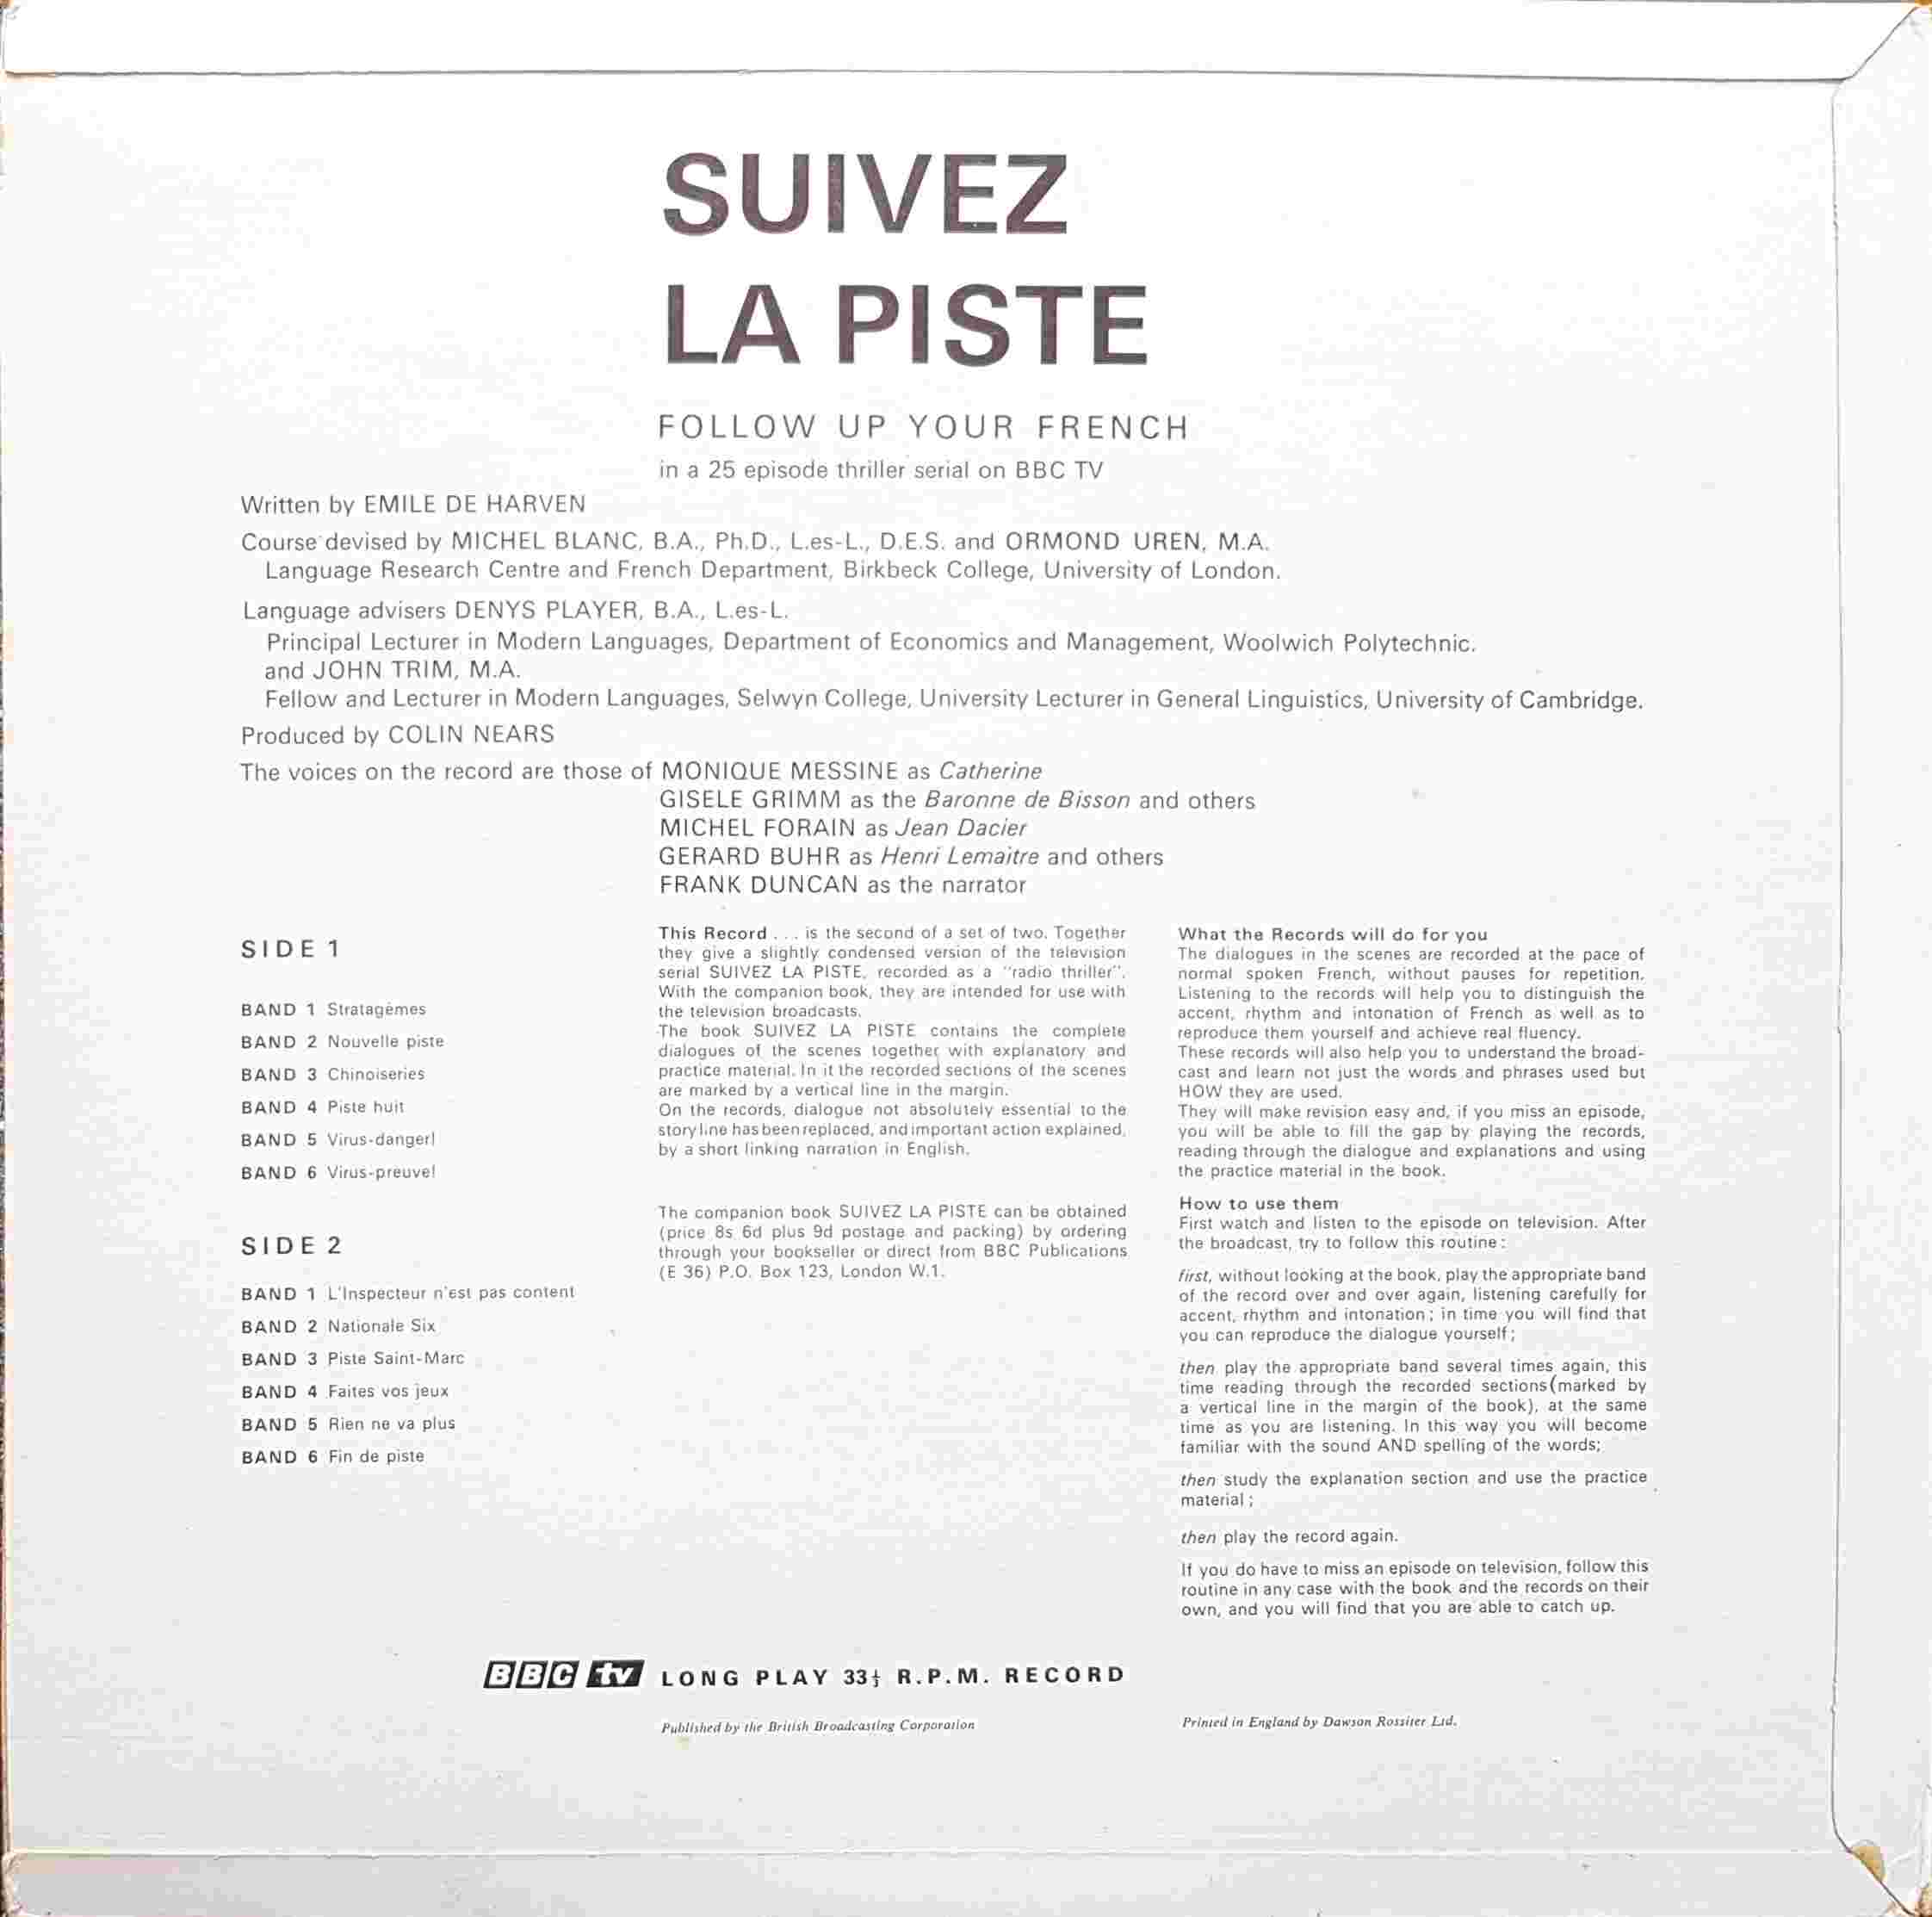 Picture of OP 49/50 Suivez la piste - Follow up your French in a 25 episode thriller serial on BBC tv - Episodes 14 - 25 by artist Emile De Harven / Michel Blanc / Denys Player / John Trim from the BBC records and Tapes library